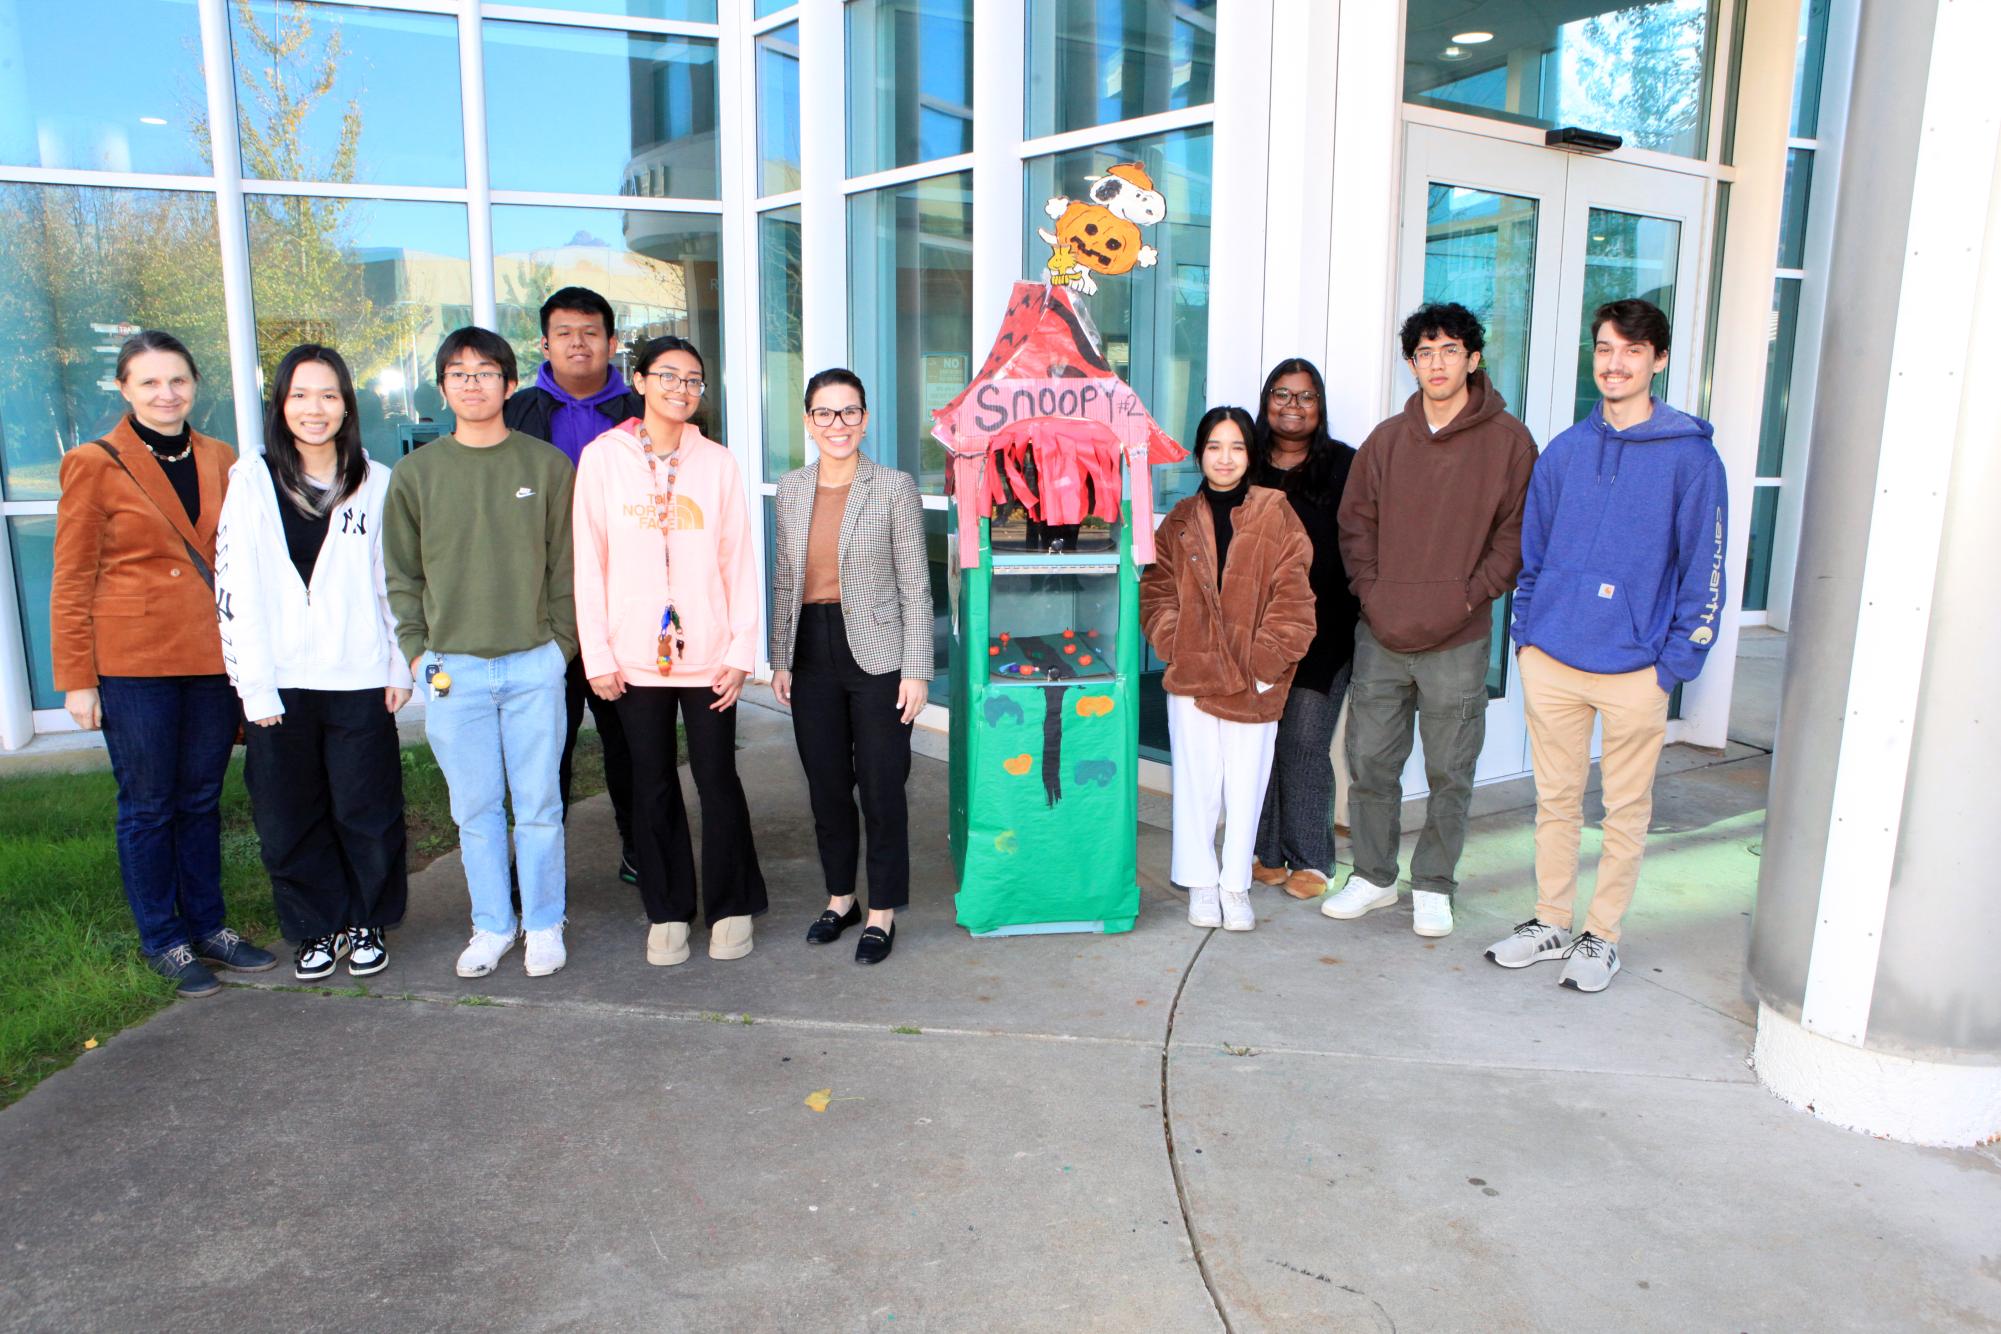 Pictured, from left to right, are club co-advisor Alina Ciscel, member Tuy Dang, club vice president Kenny Nguyen, member Richard Escobar in the back, club president Leesa Cabrera, CEO Esposito, club member Lay Jennifer Yunus, club secretary Brianna Biswas and club members Devon Nguyen and Adison Graves. 